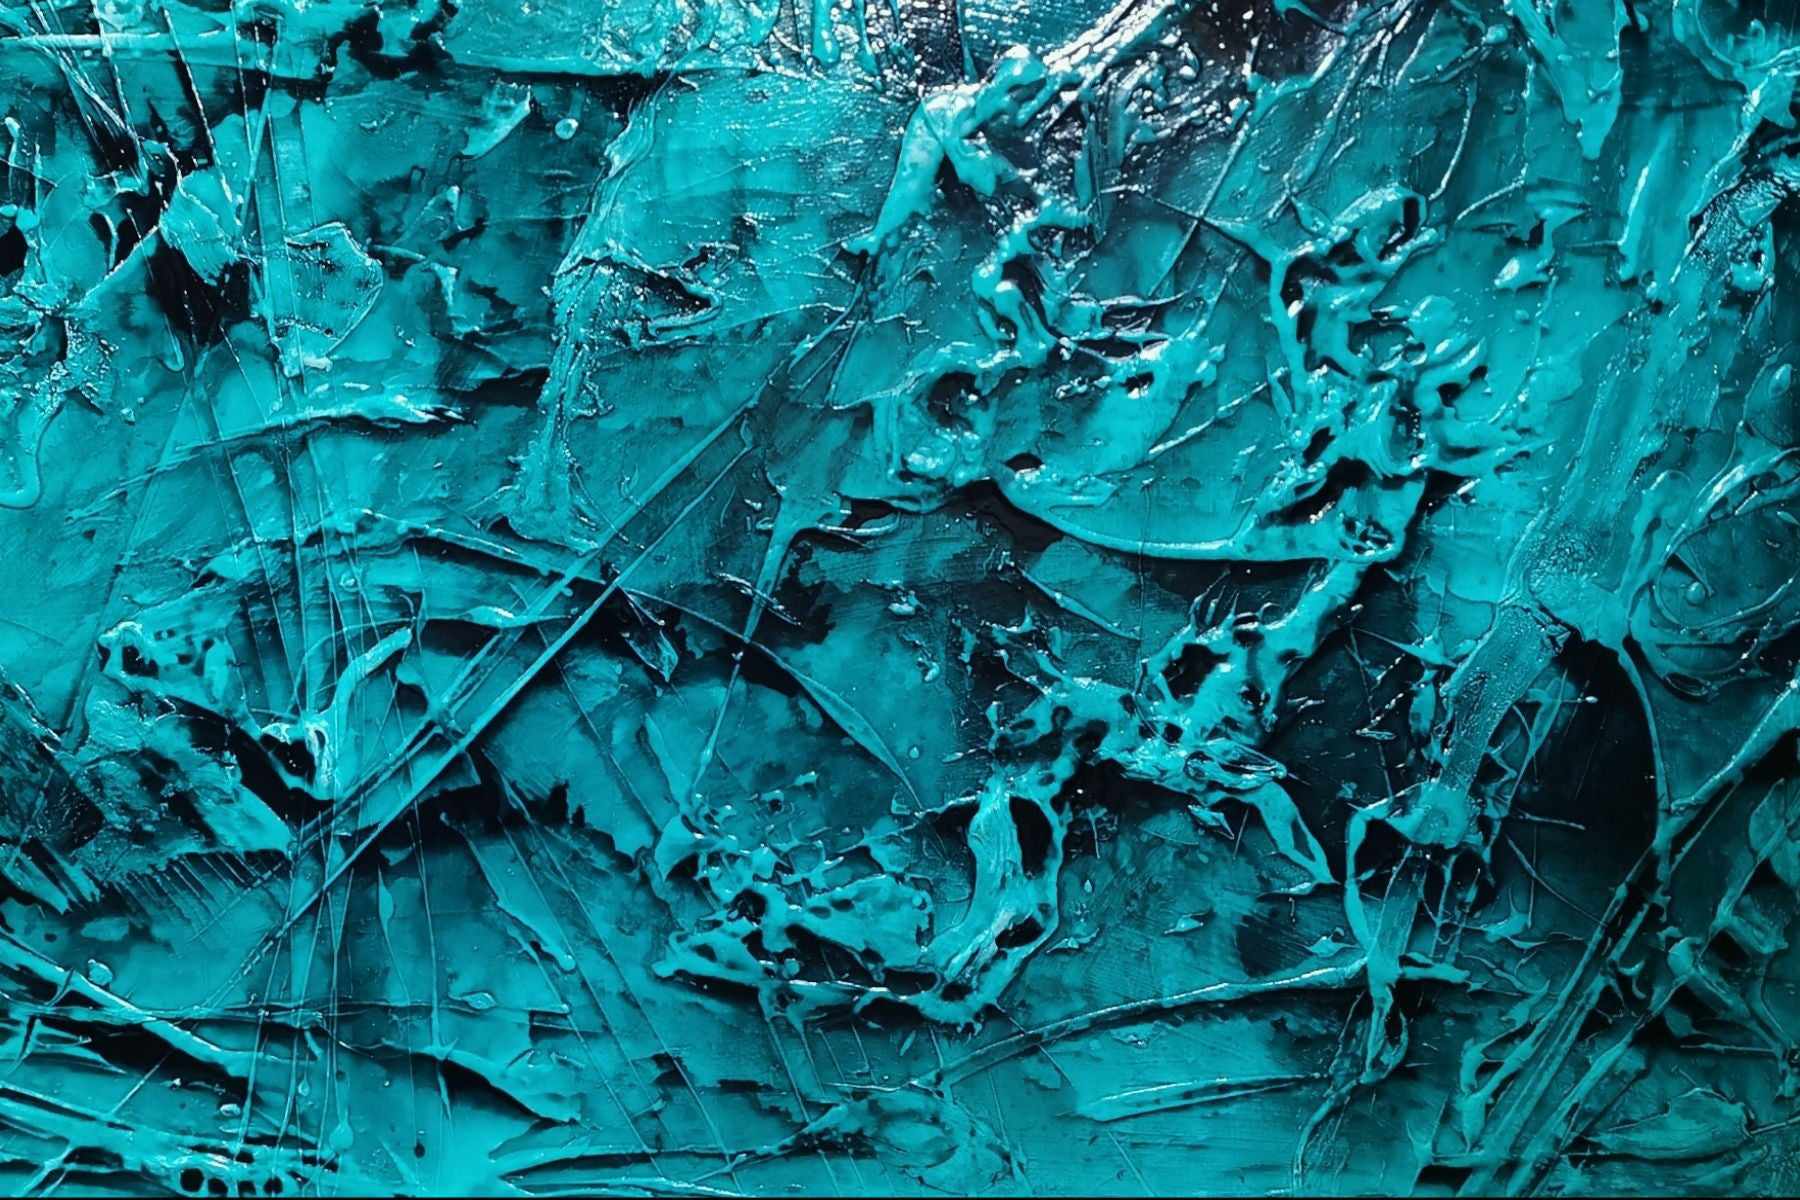 Aquatic Resonance 190cm x 100cm Teal Ink Textured Abstract Painting (SOLD)